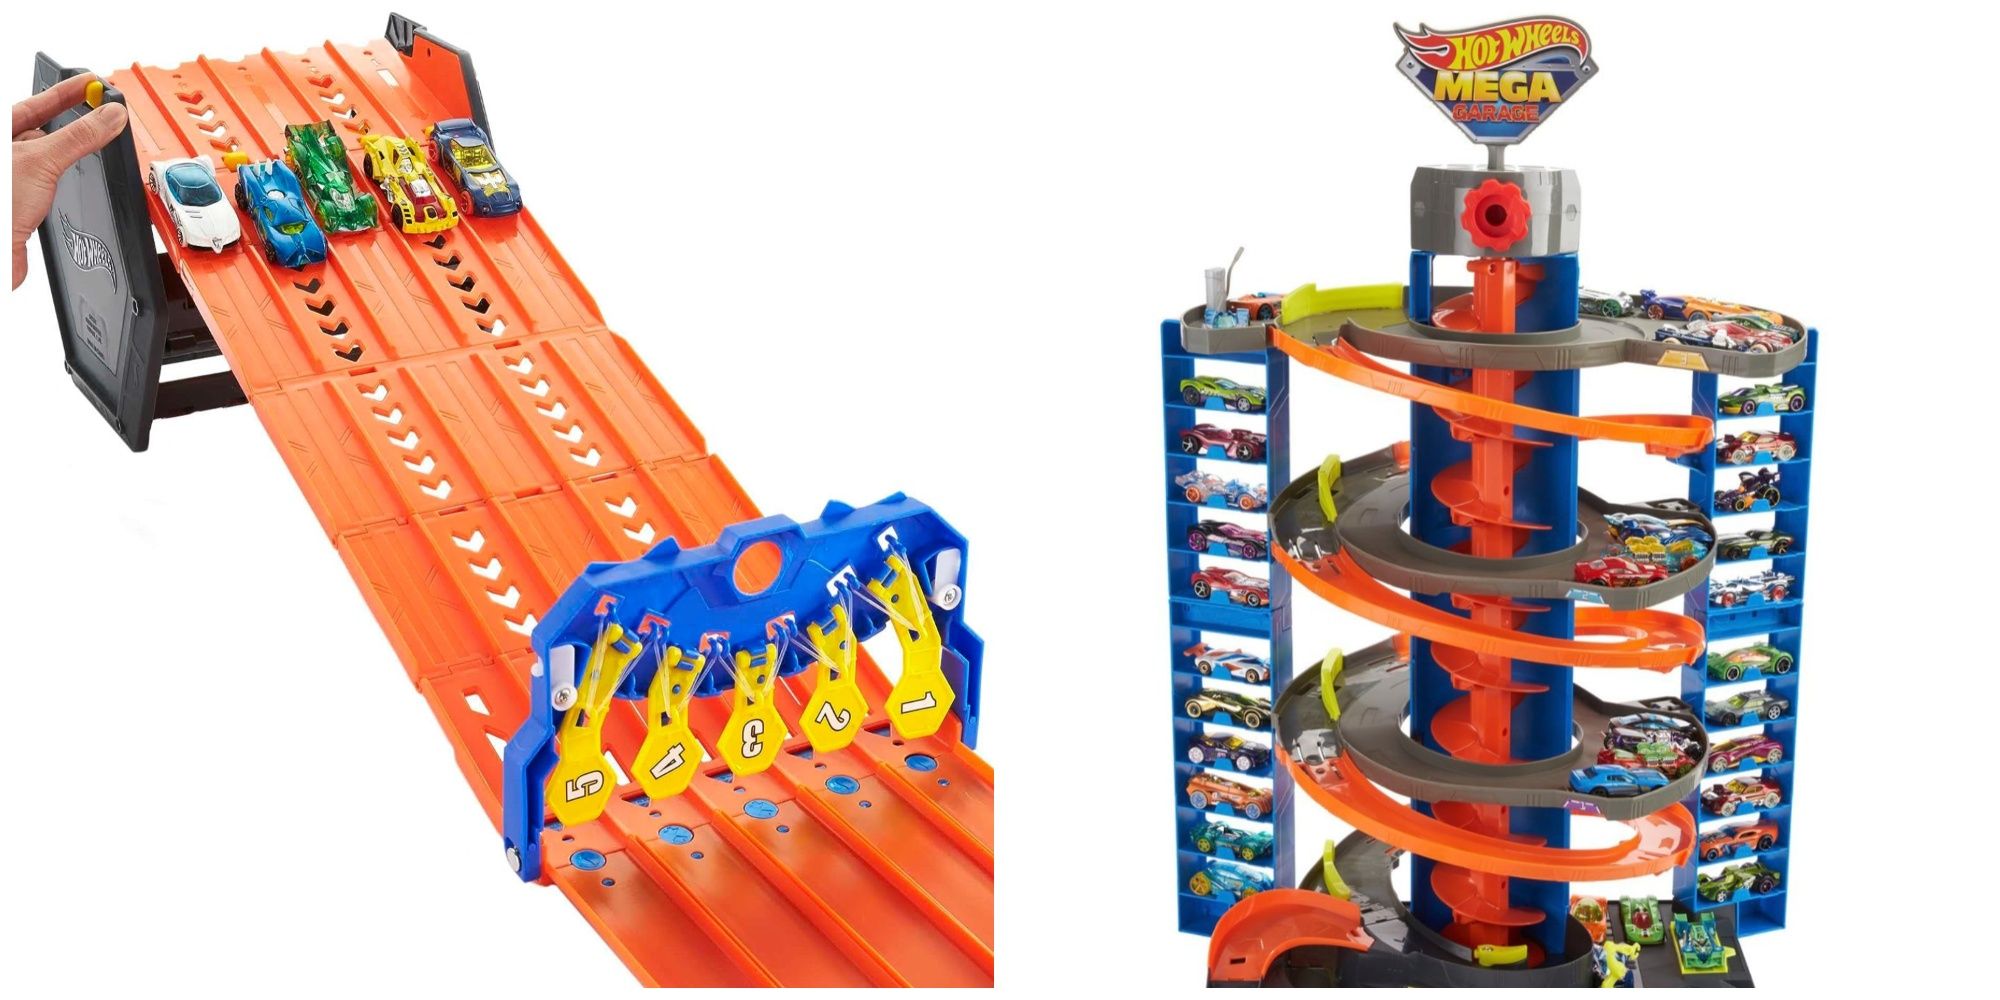 Two official Hot Wheels tracks in a split dual-image. On the left, five cars race down an orange track. On the right, roughly two dozen cars sit in a vertical garage.